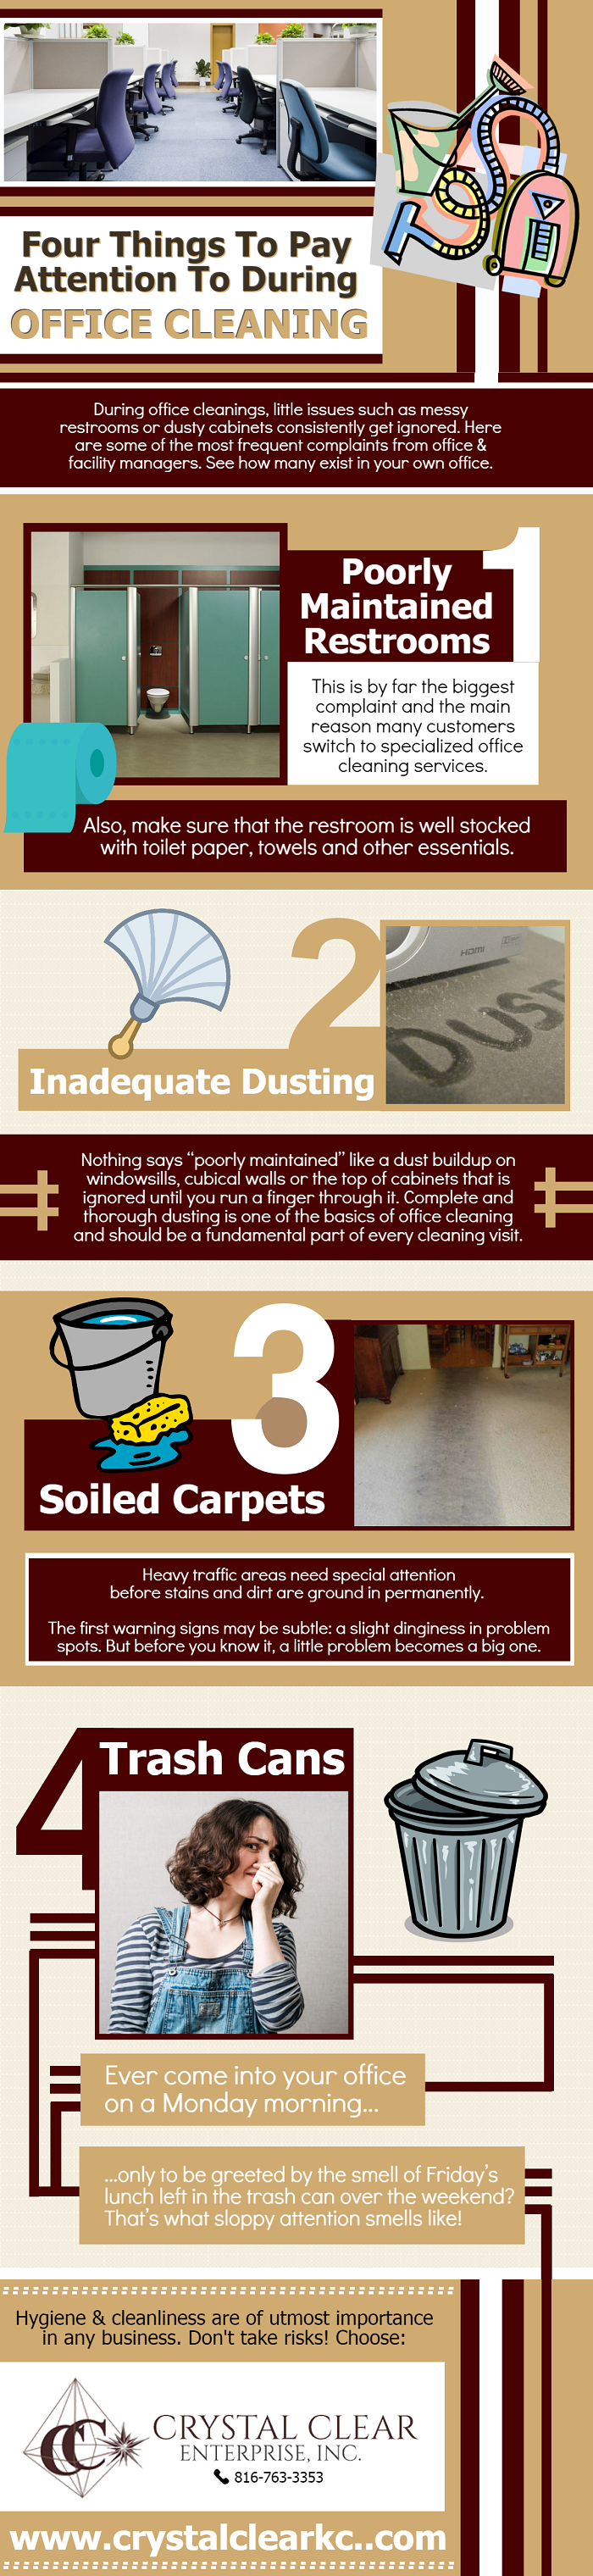 Four Things to Play Attention to During Office Cleaning